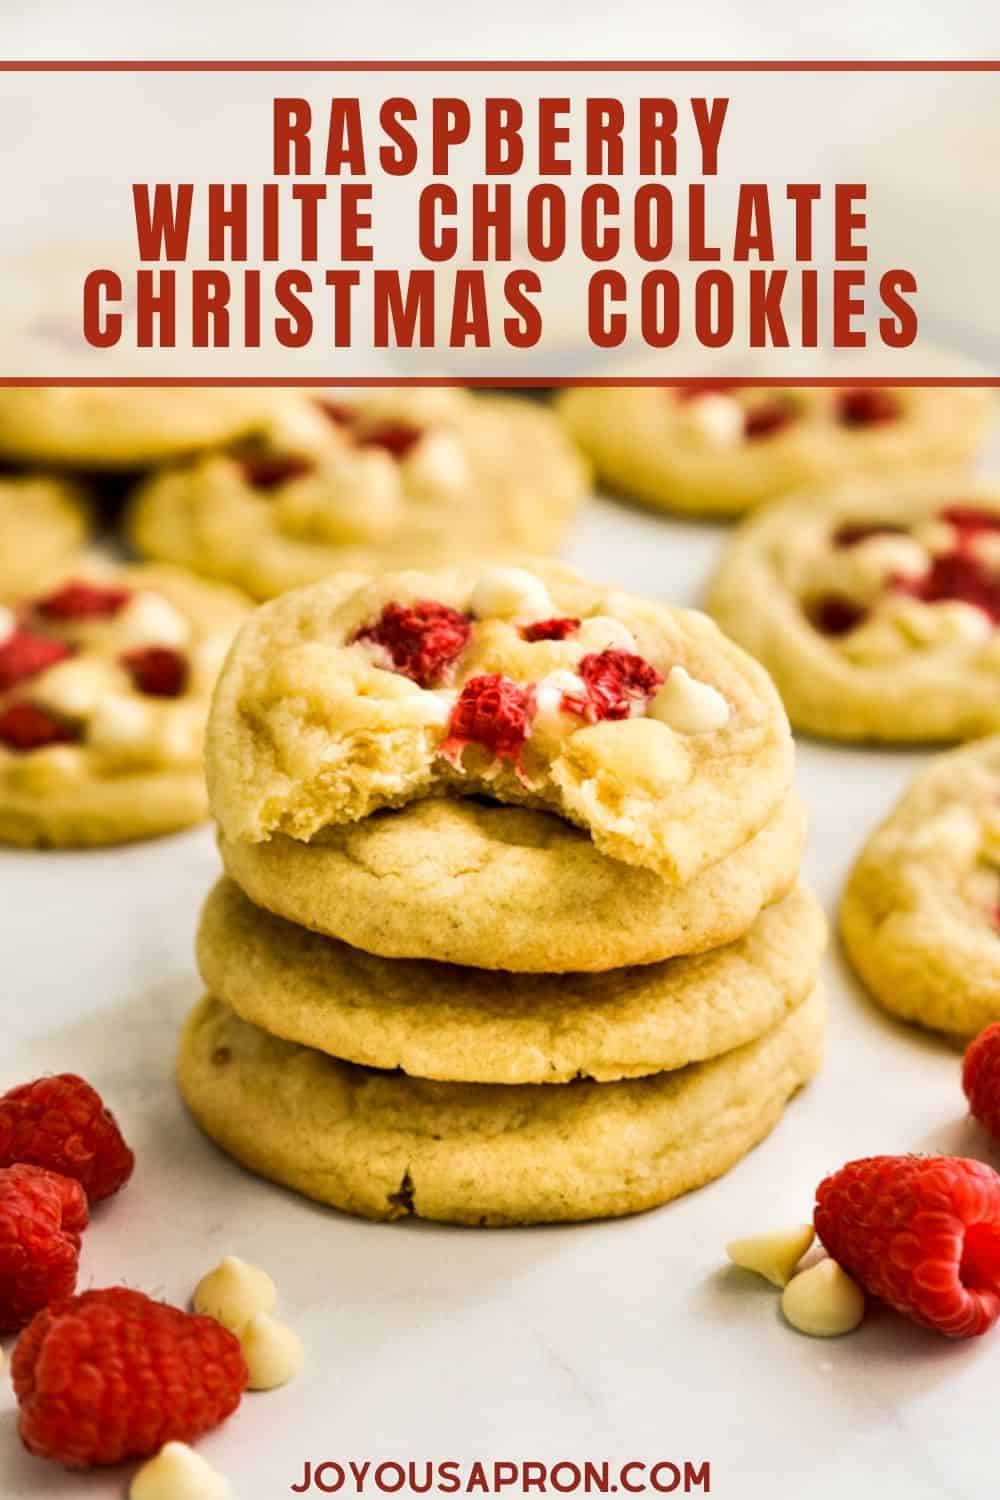 White Chocolate Raspberry Cookies - Soft and chewy festive cookies loaded with raspberry and white chocolate chips. Easy and perfect for Christmas holiday baking! via @joyousapron